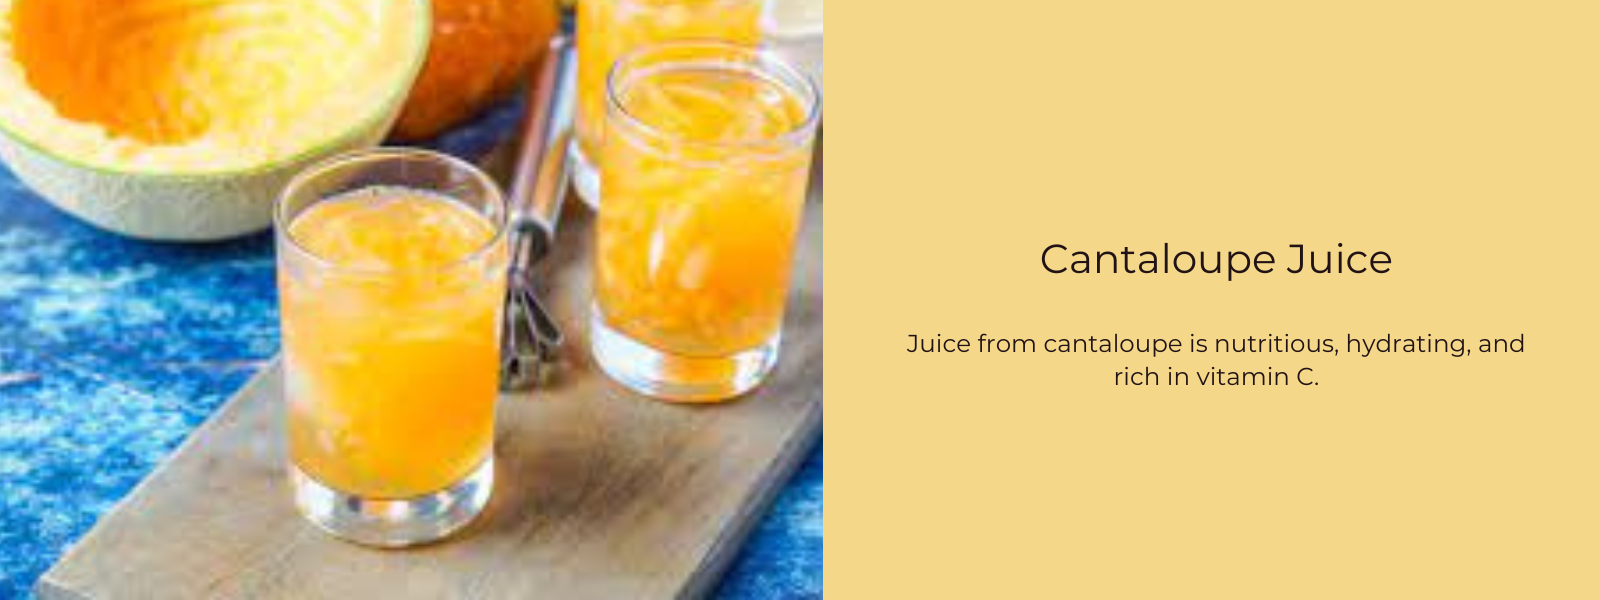 Cantaloupe Juice – Health Benefits, Uses and Important Facts